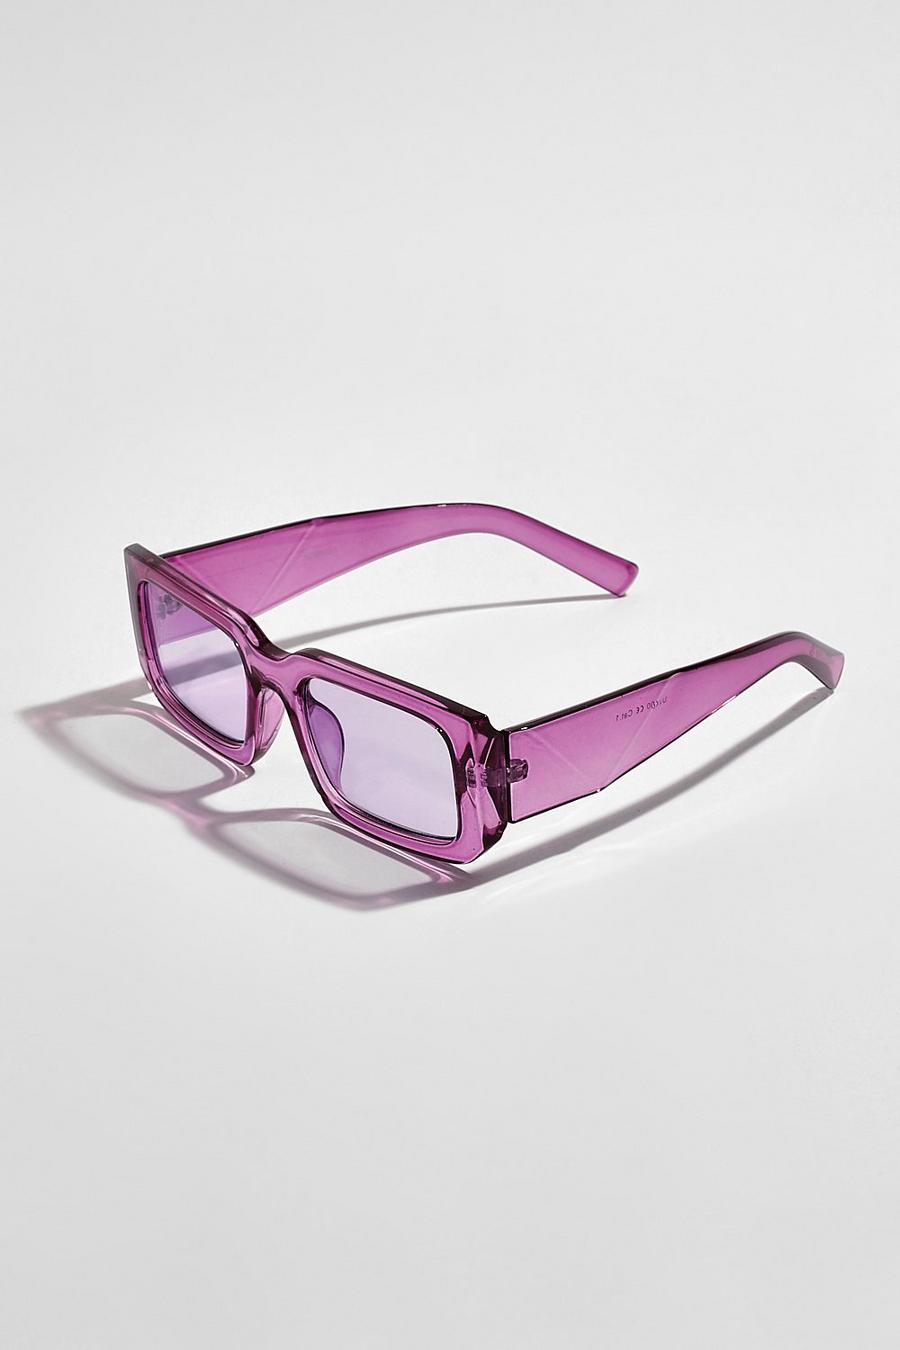 Lunettes rectangulaires, Pink